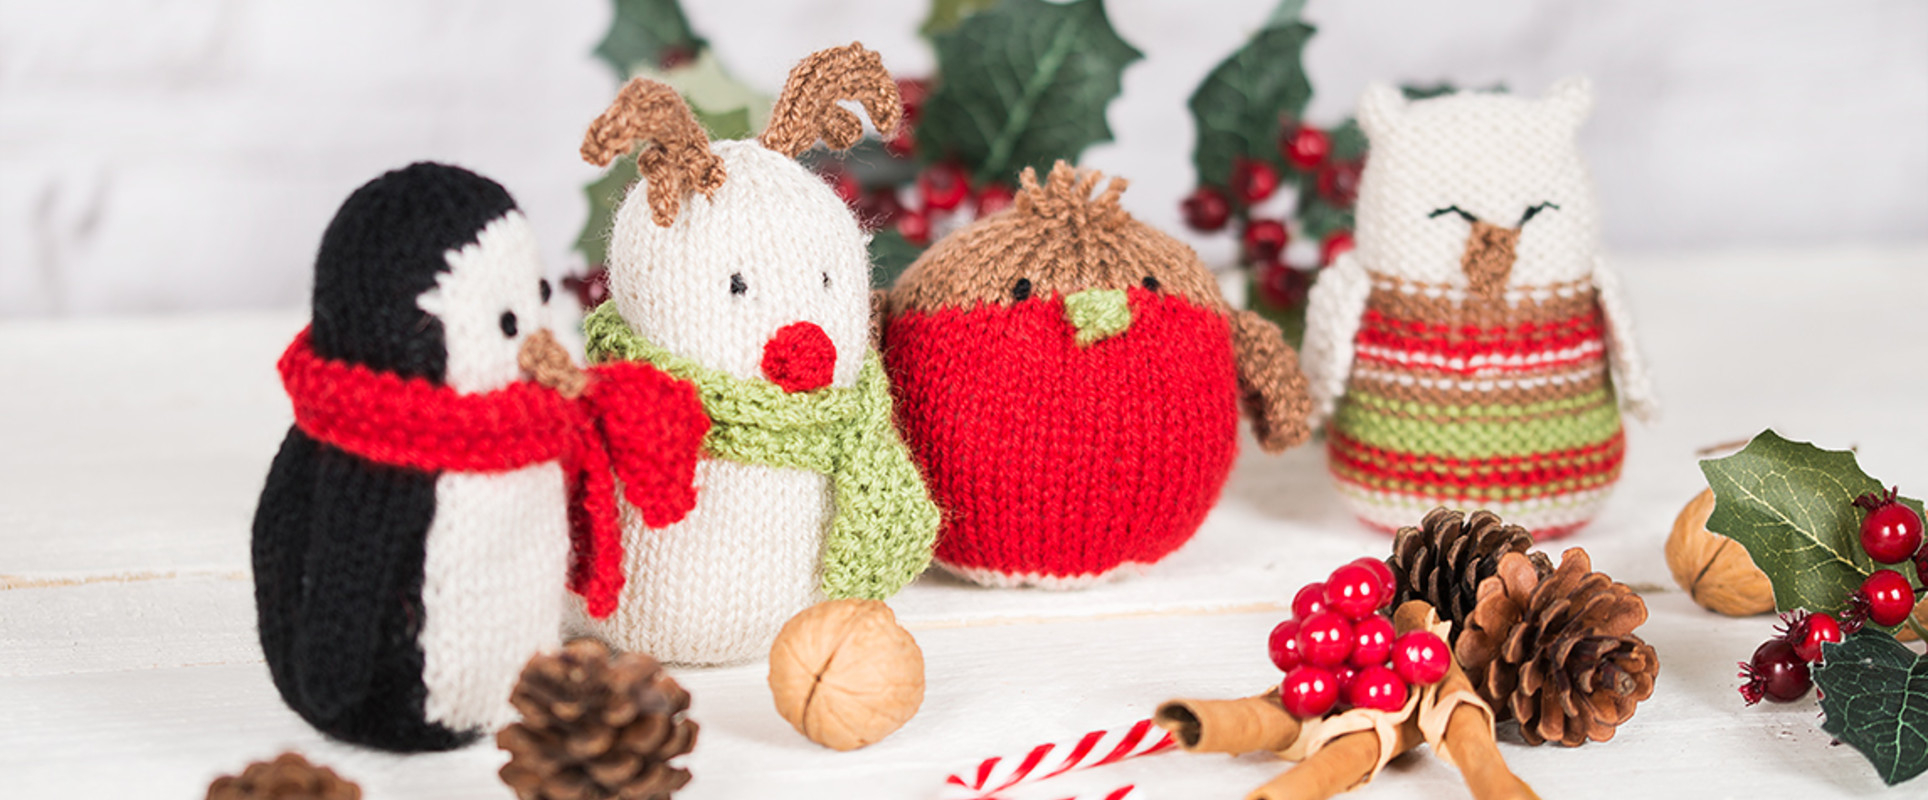 Knit Christmas Ornament Patterns 10 Free Patterns To Get You Knitting This Christmas Lovecrafts